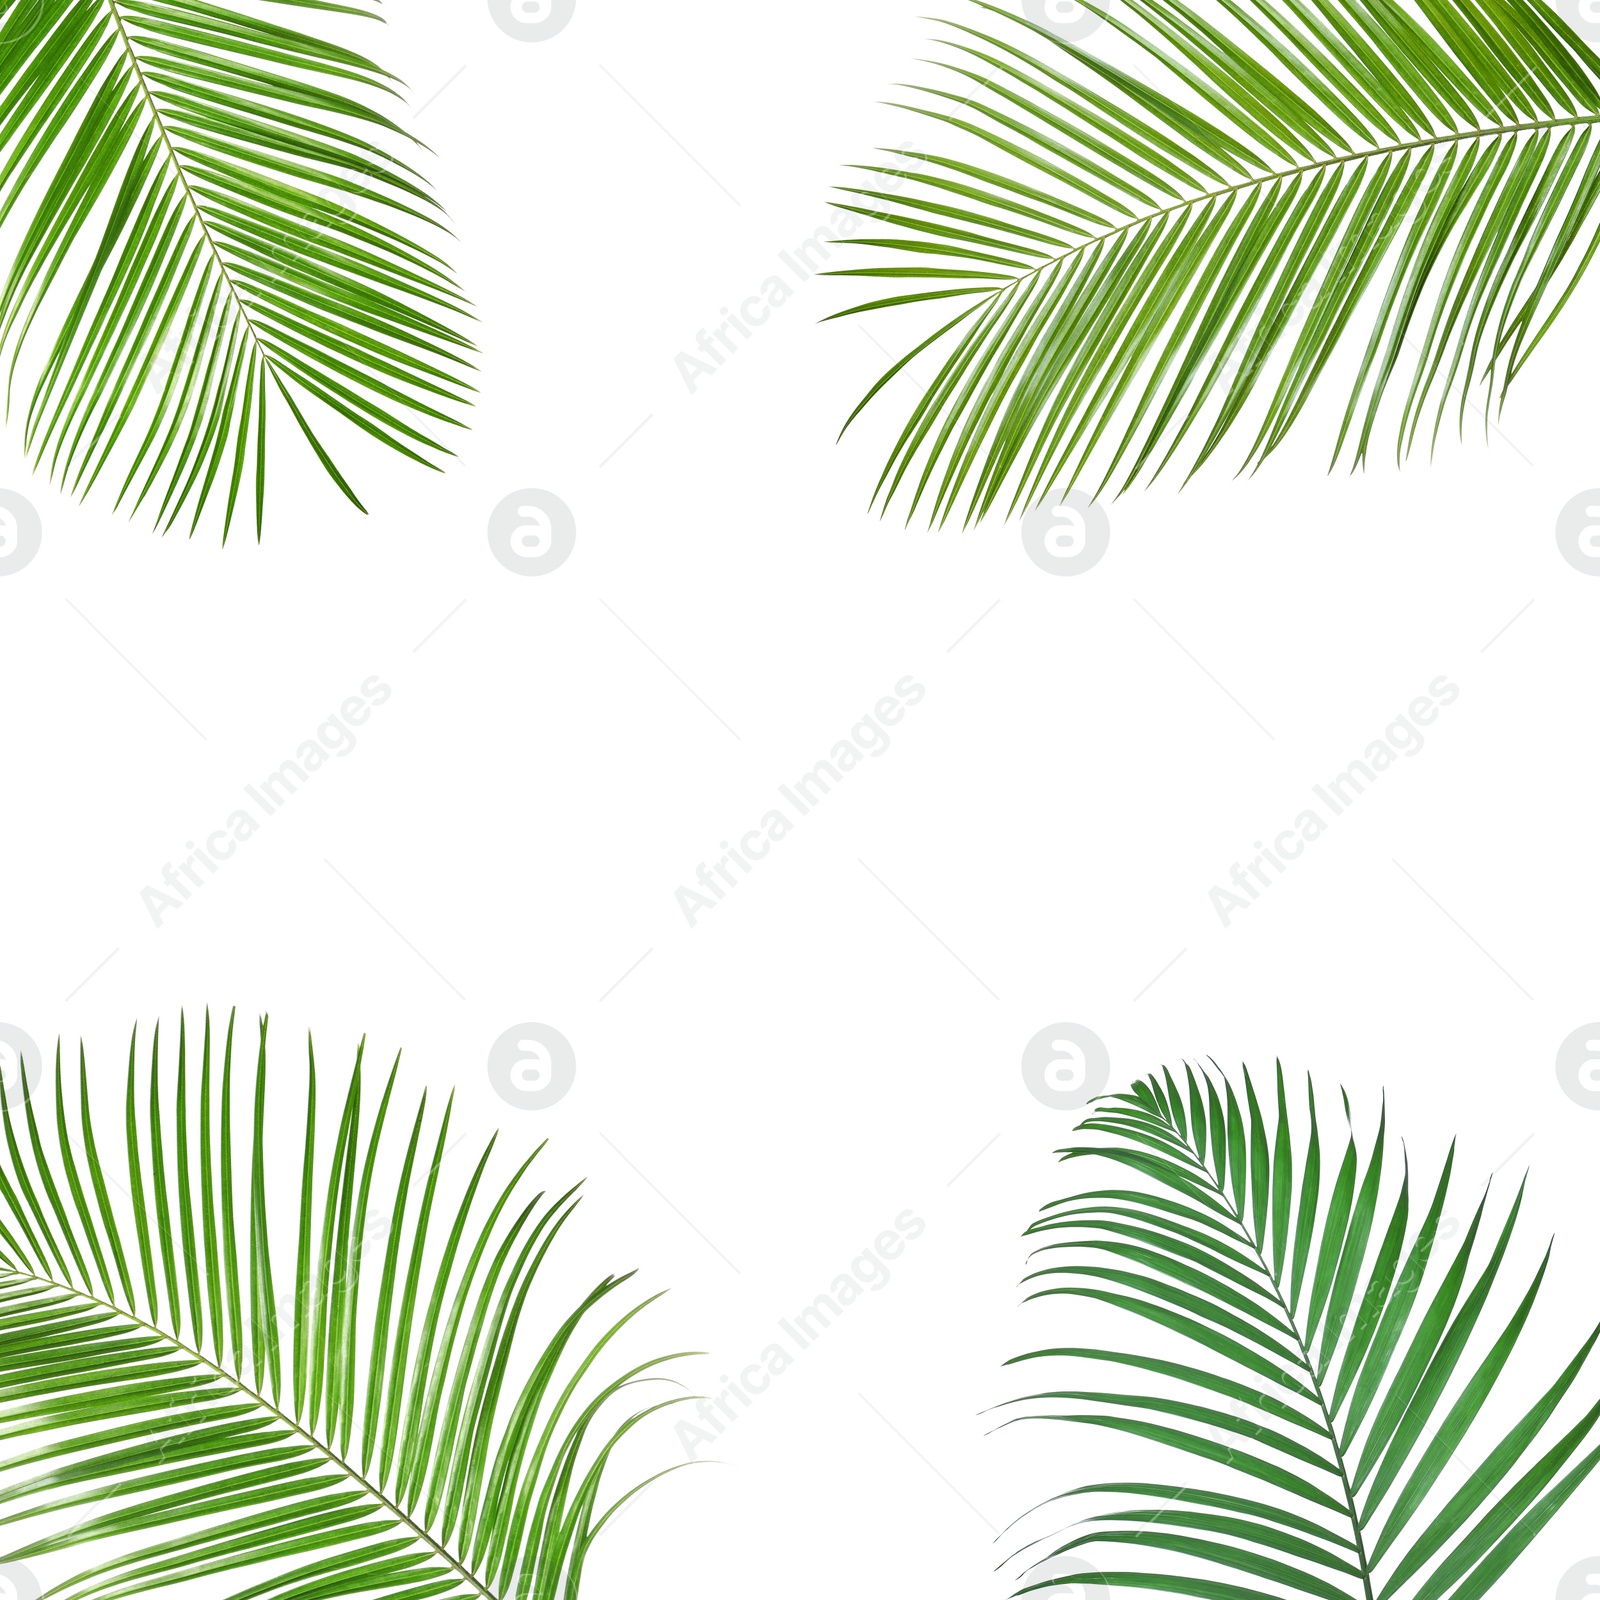 Image of Frame made of beautiful lush tropical leaves on white background. Space for text